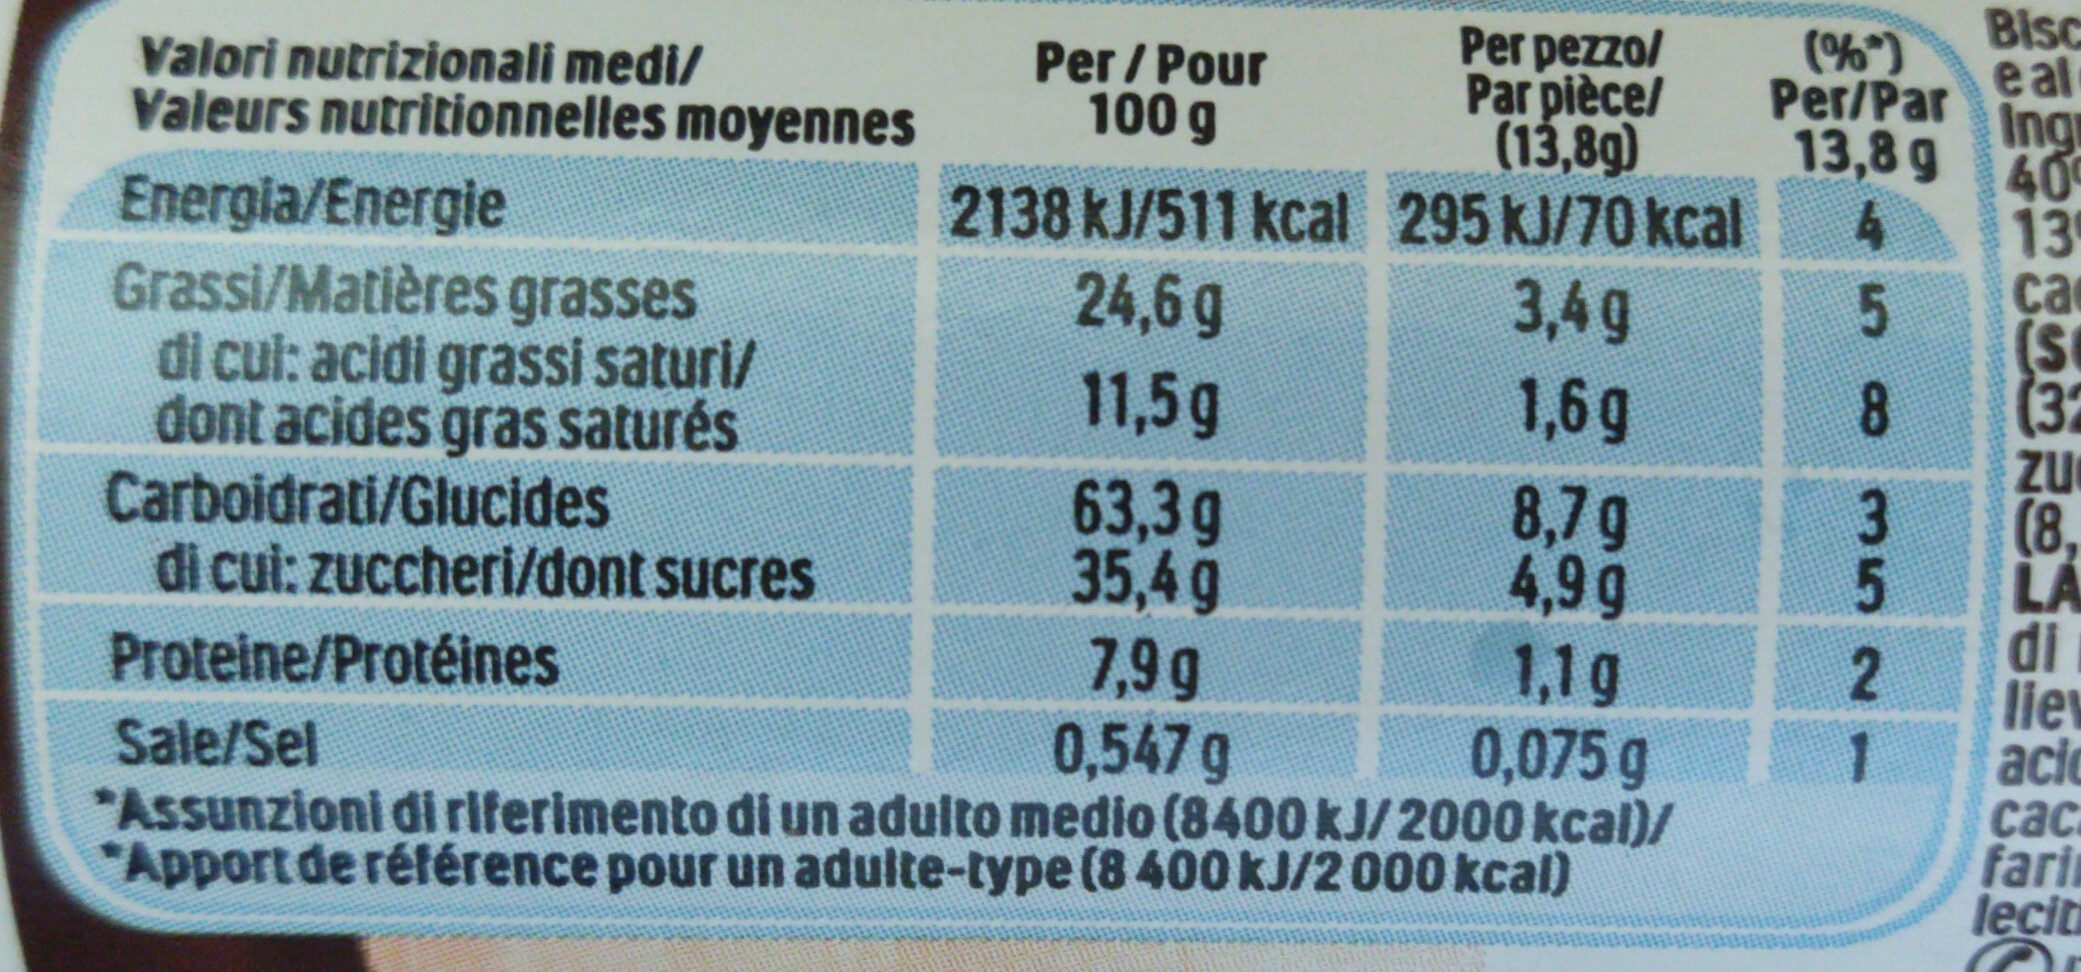 Nutella biscuits - Nutrition facts - it